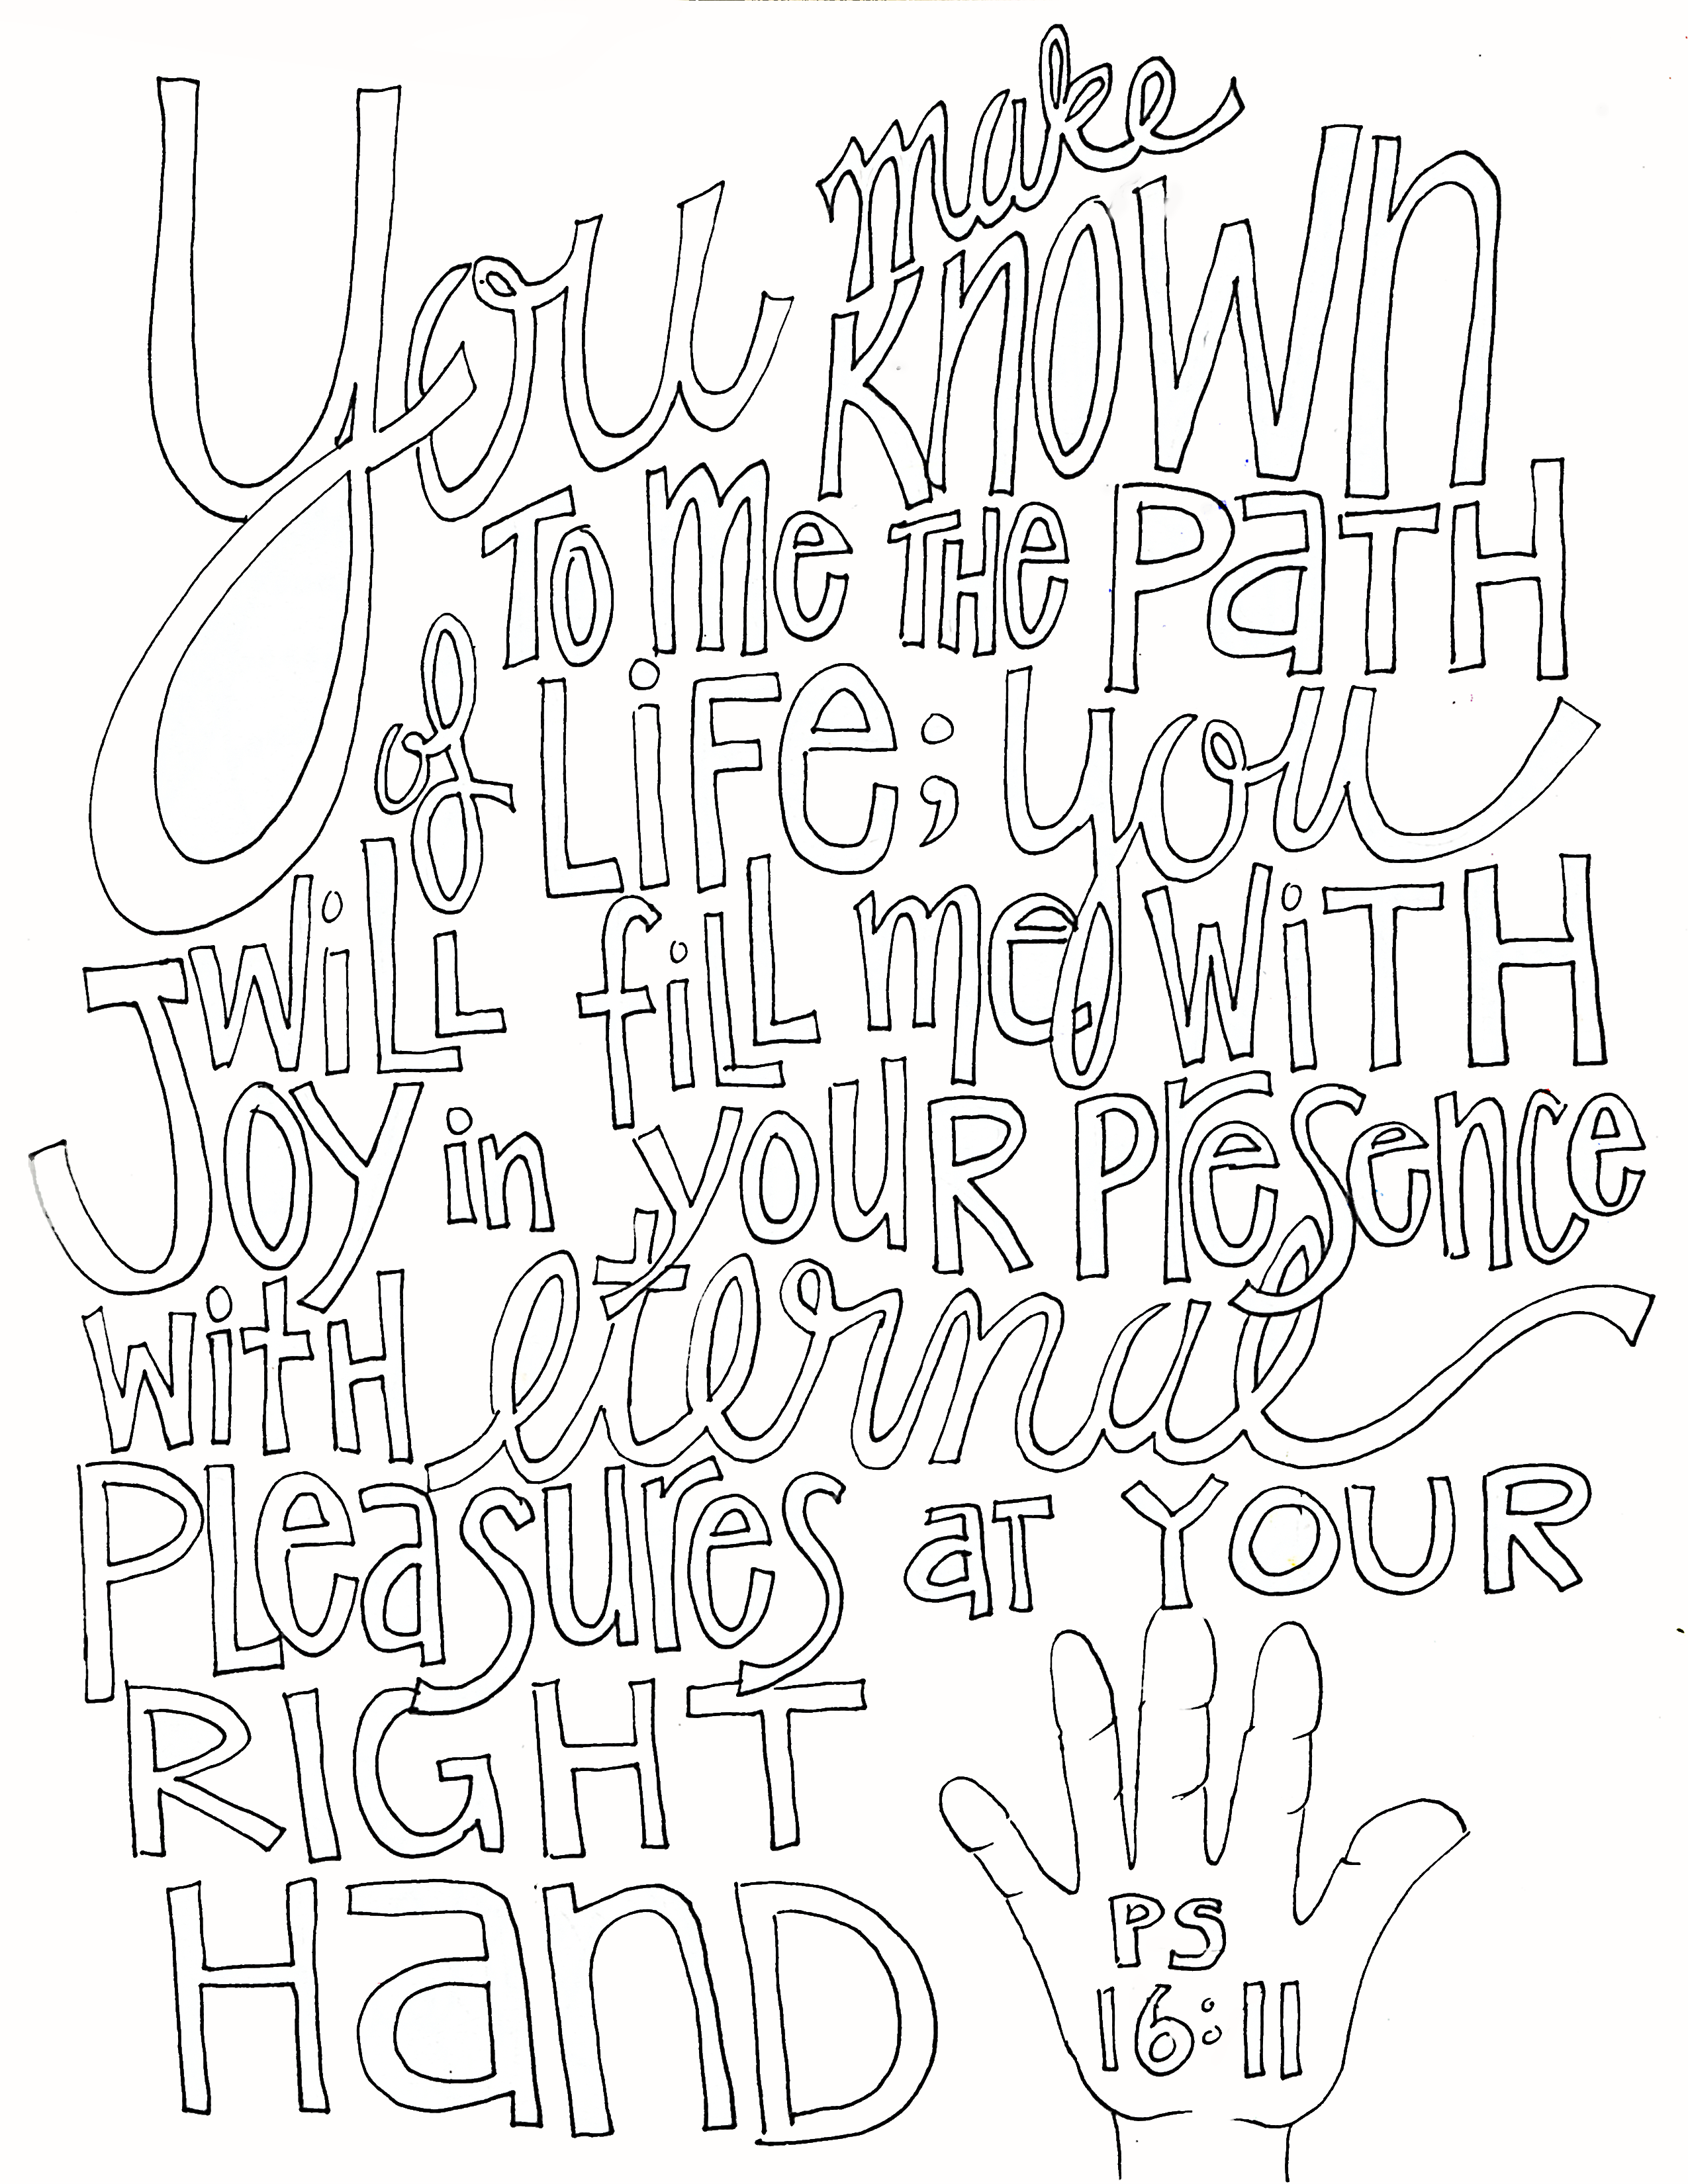 Psalms Coloring Pages at GetColorings.com | Free printable colorings